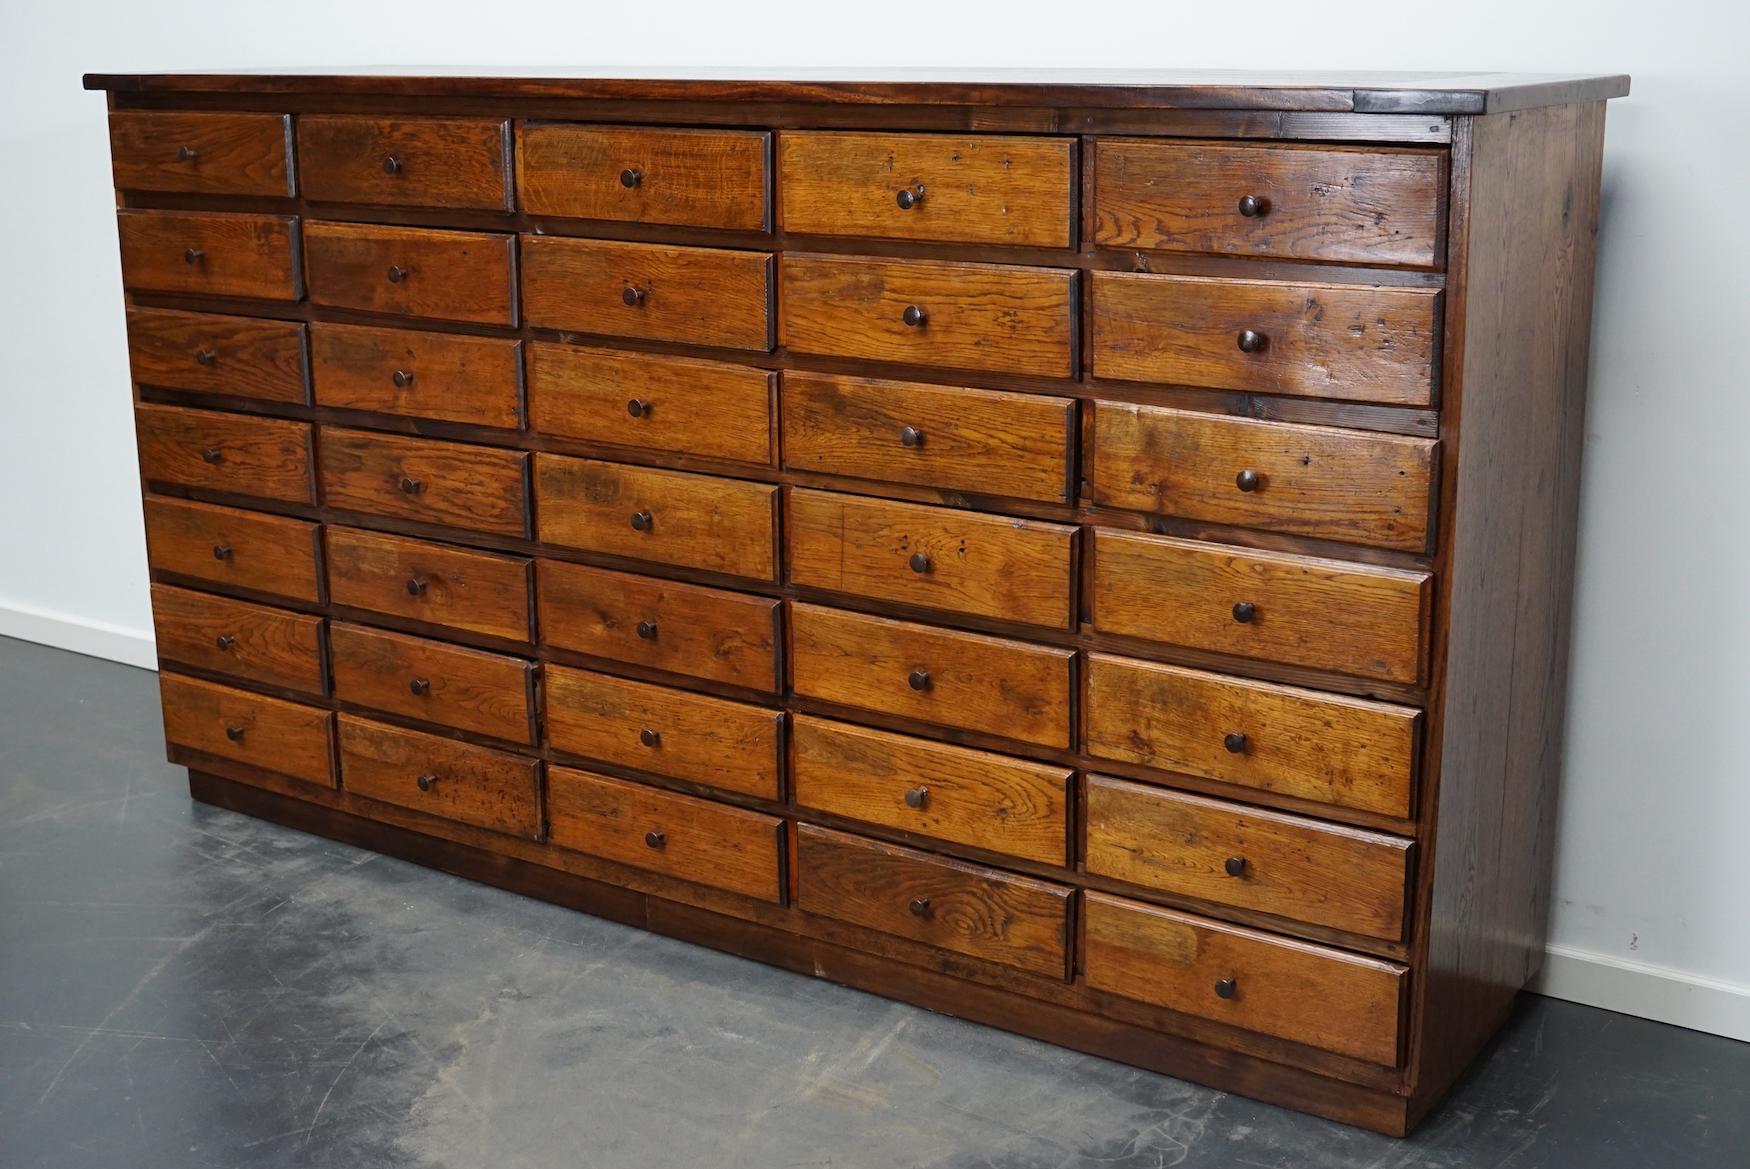 This oak apothecary cabinet with brass hardware was made in the early 20th century in France and was used in a hardware store. It is very well made and it remains in a good restored condition. The interior dimensions of the drawers are: D W H 40 x